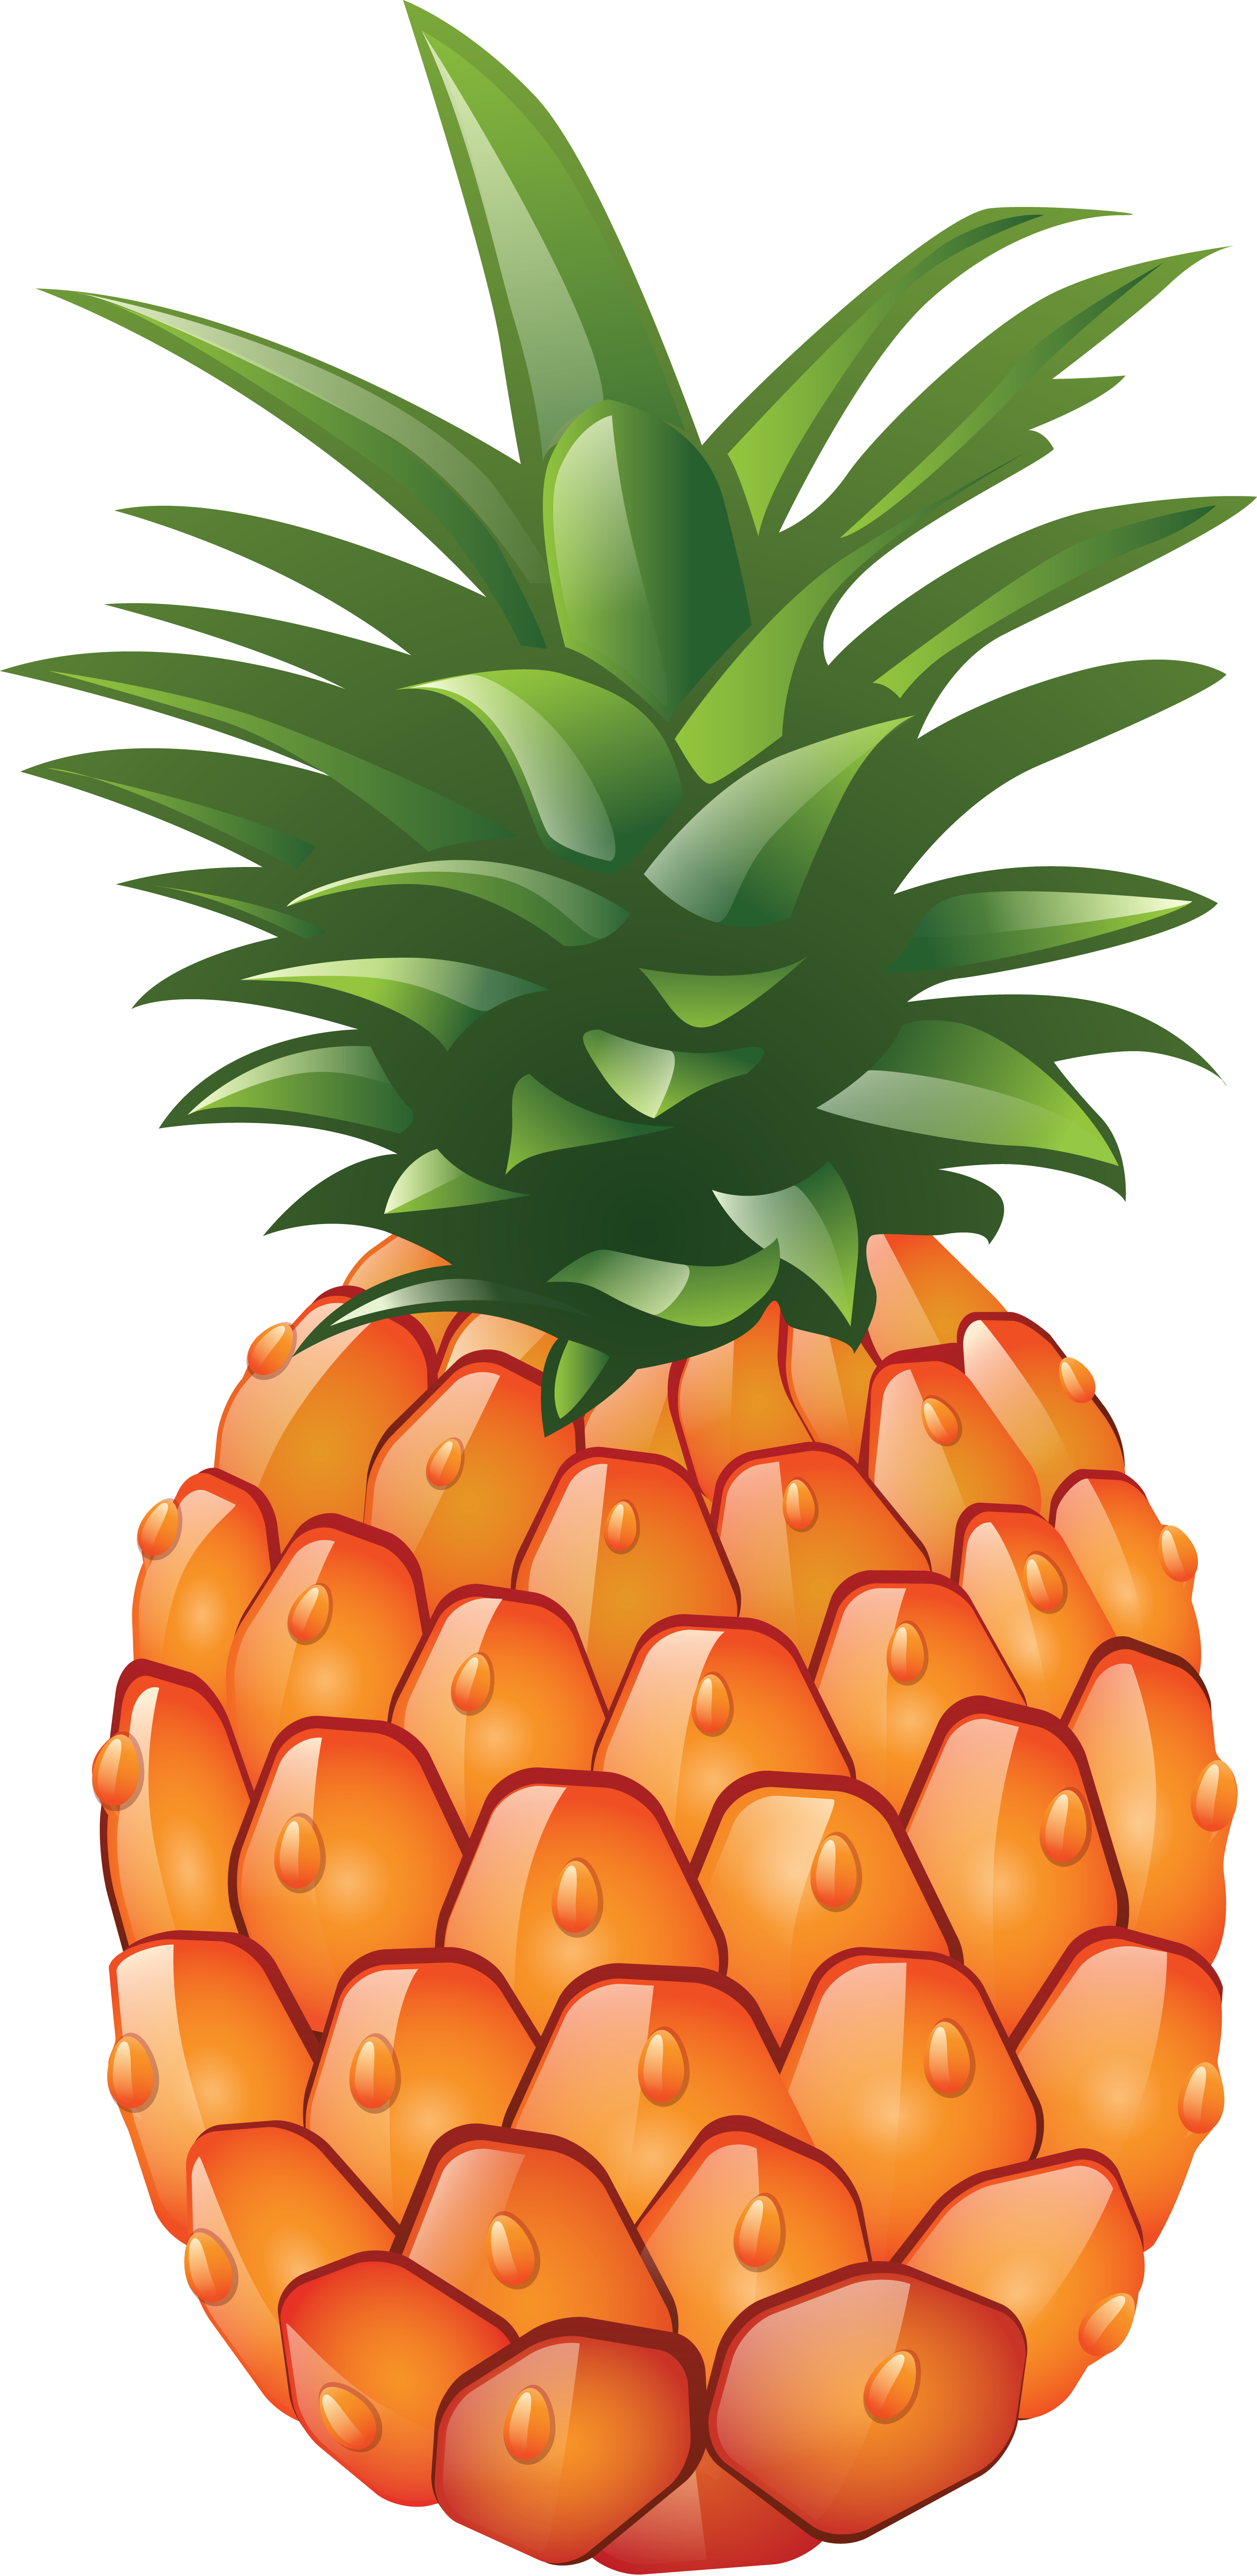 Pineapple Fruit Transparent PNG Images Free Download.